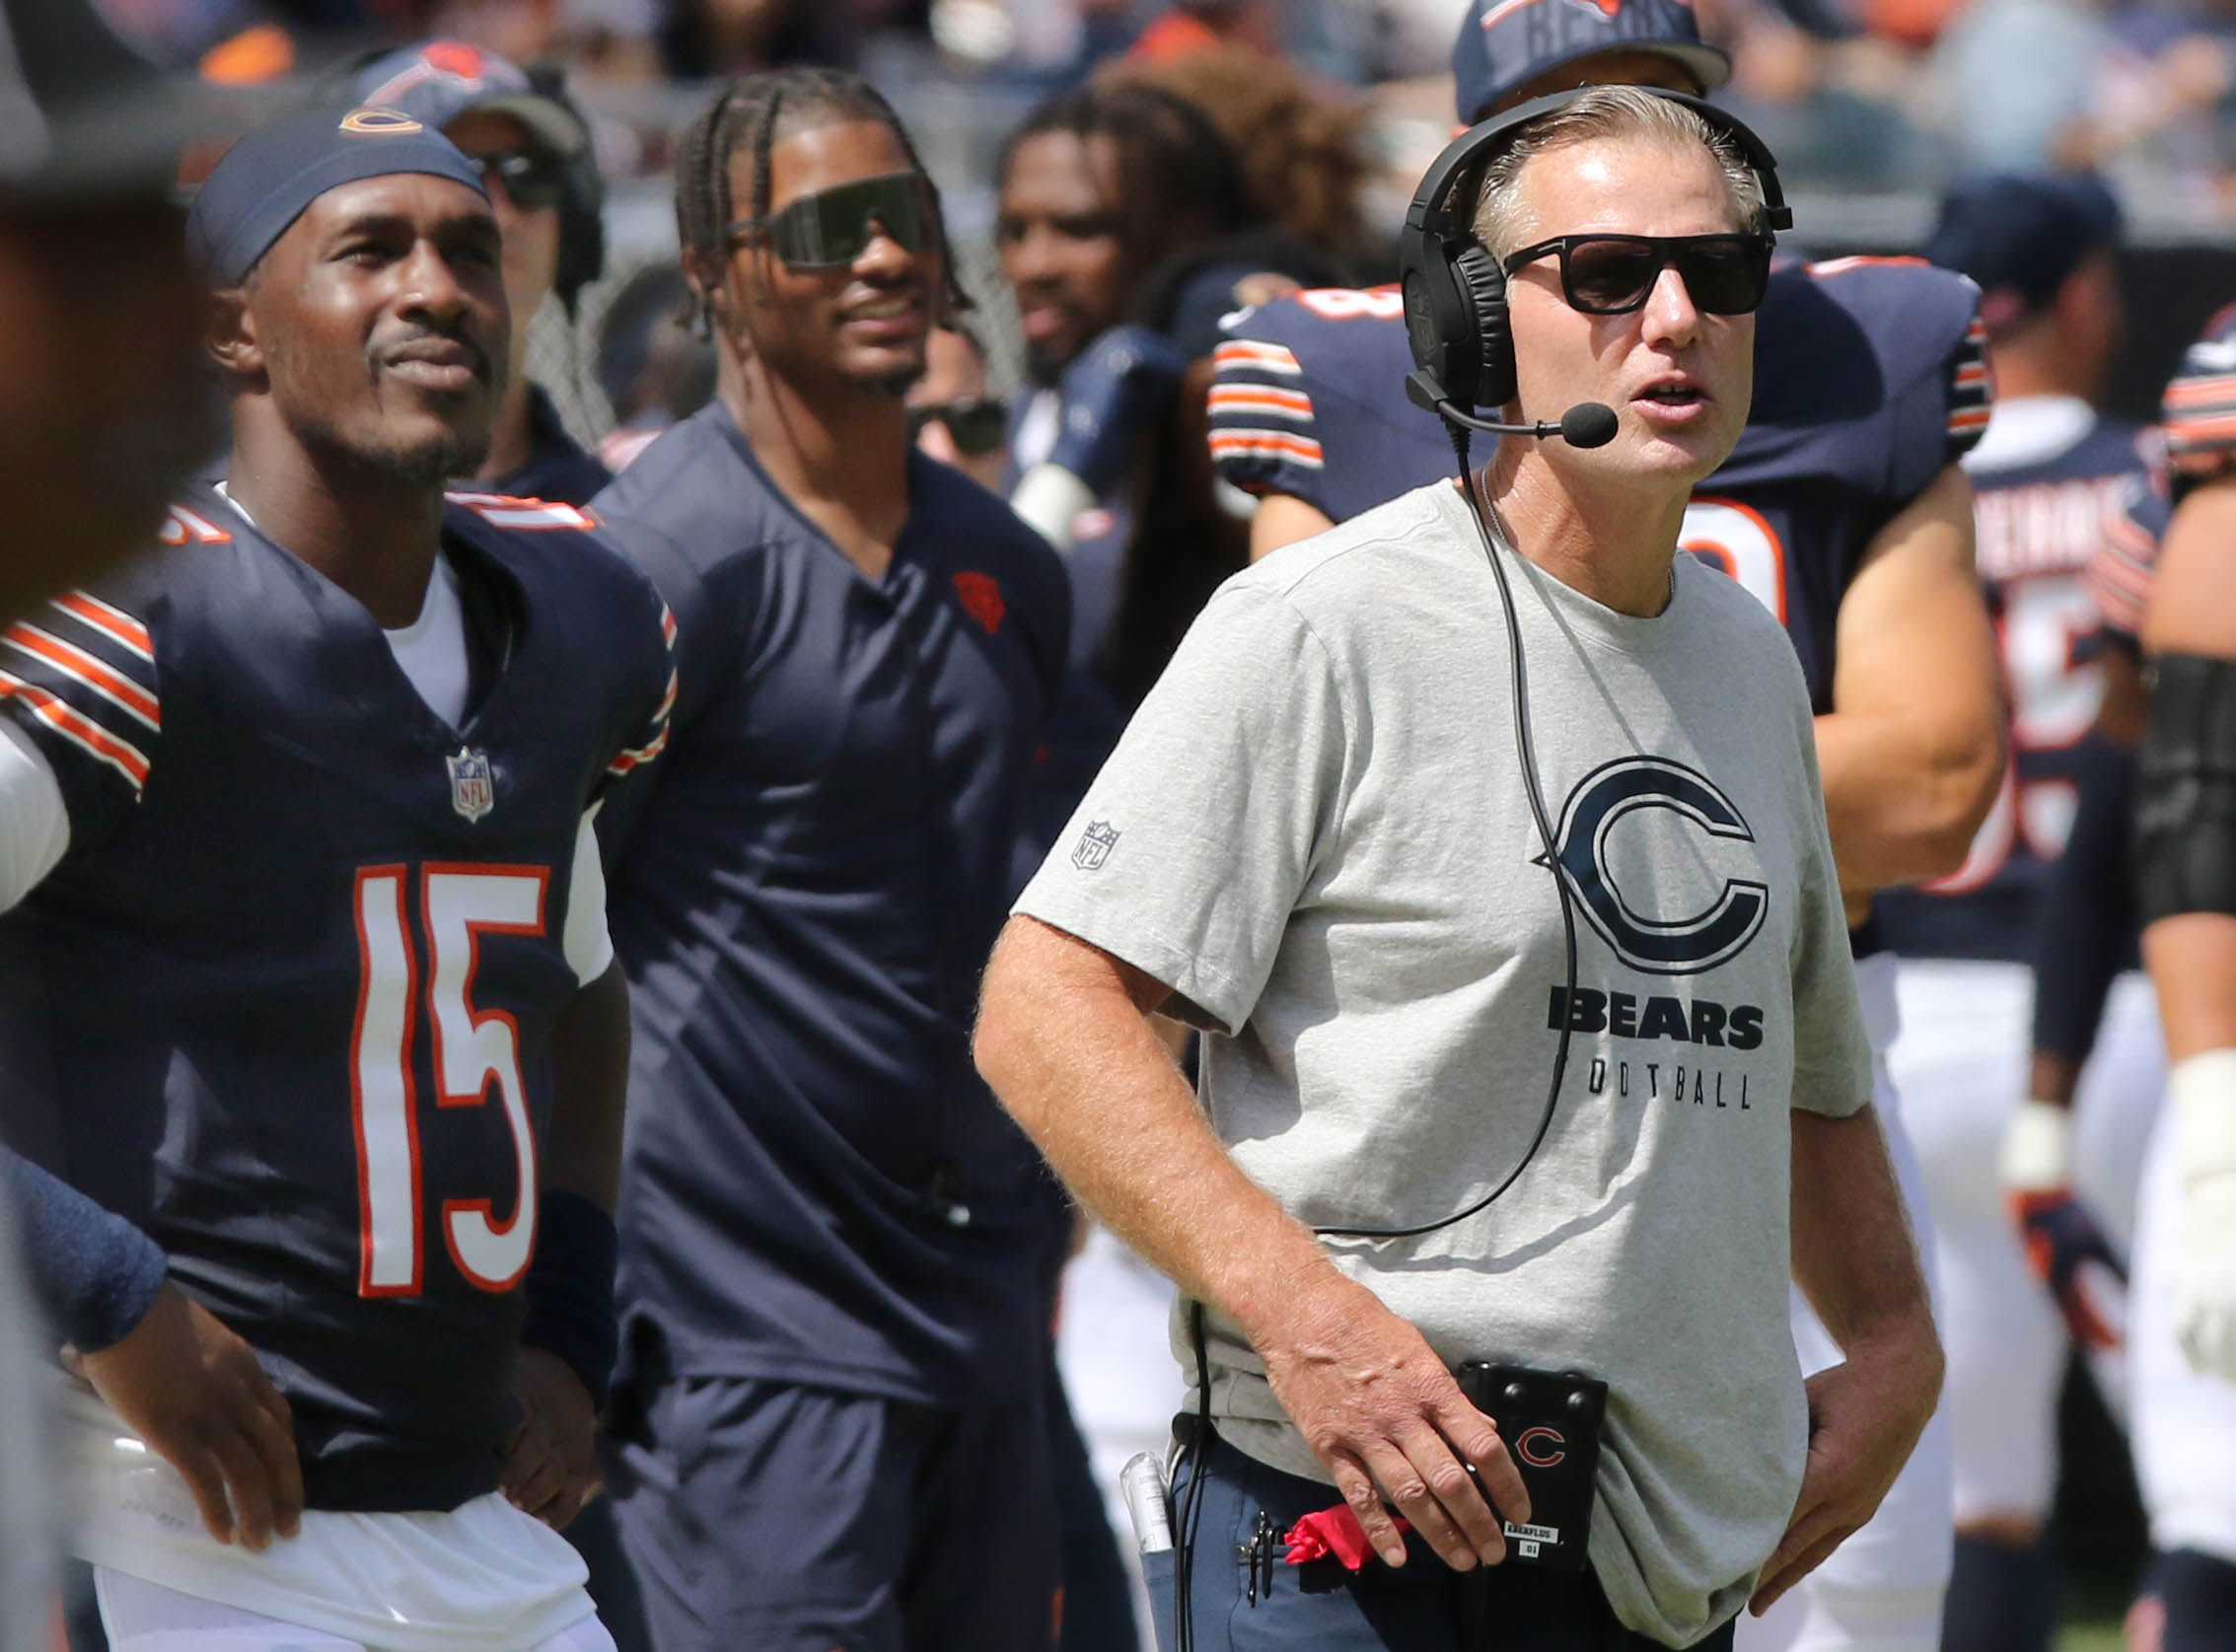 Bears vs Colts Preseason 2023: How to watch, game time, previews, and more  - Windy City Gridiron